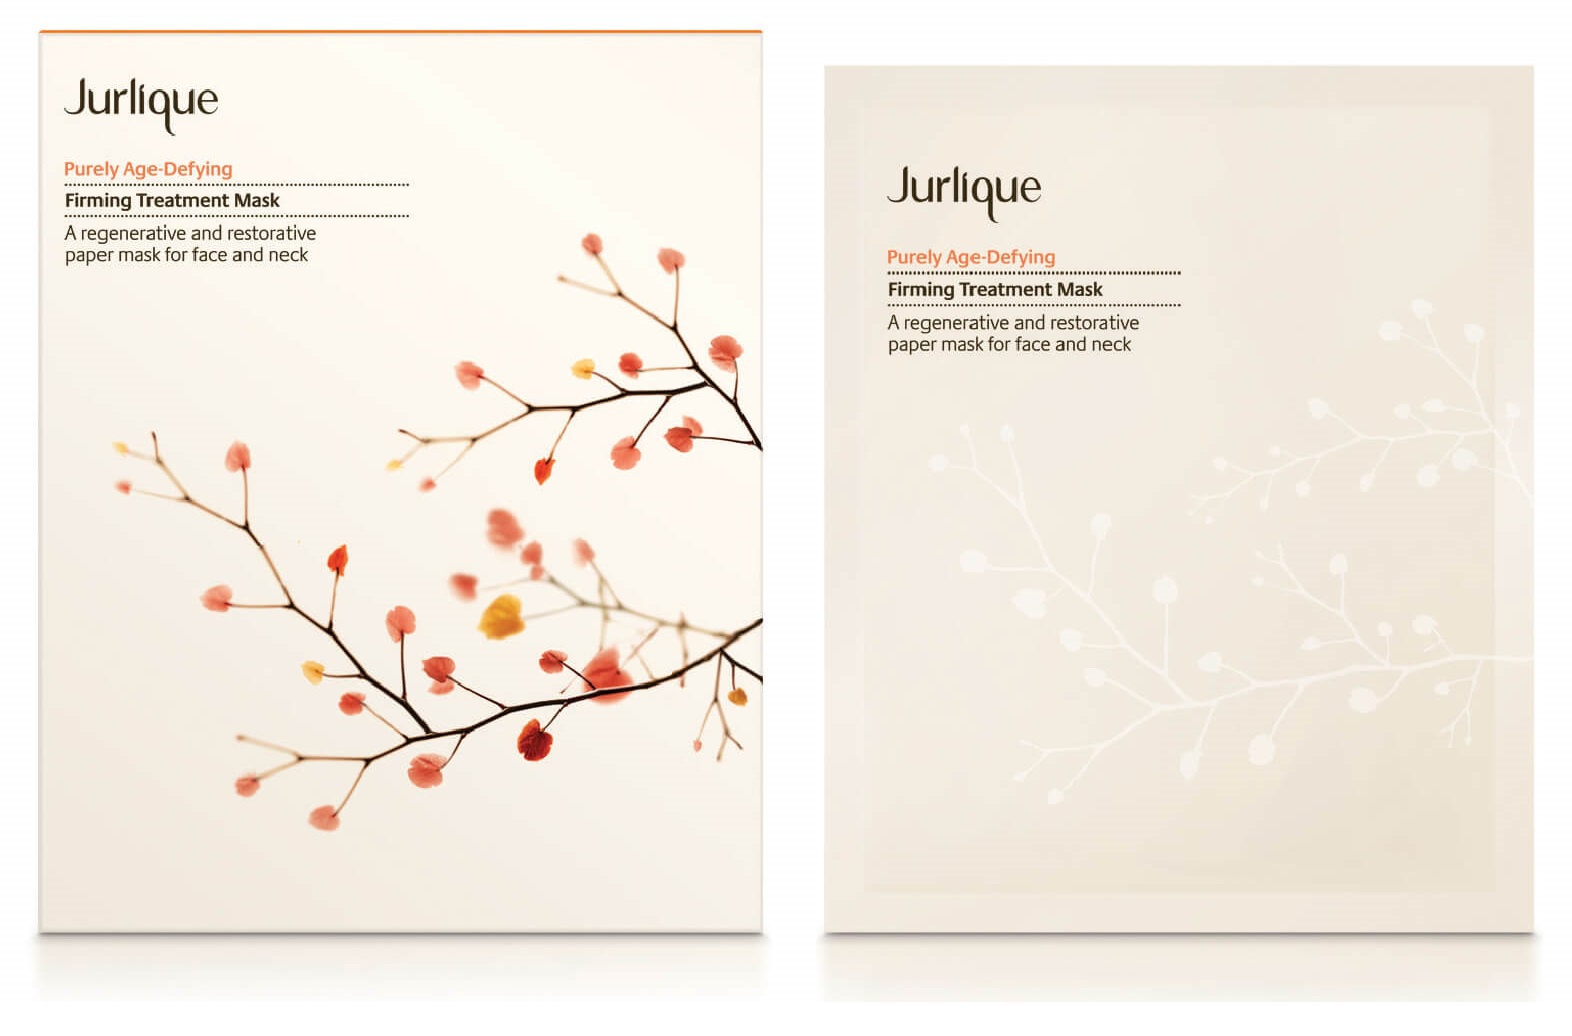 Jurlique Purely Age-Defying Firming Treatment Mask